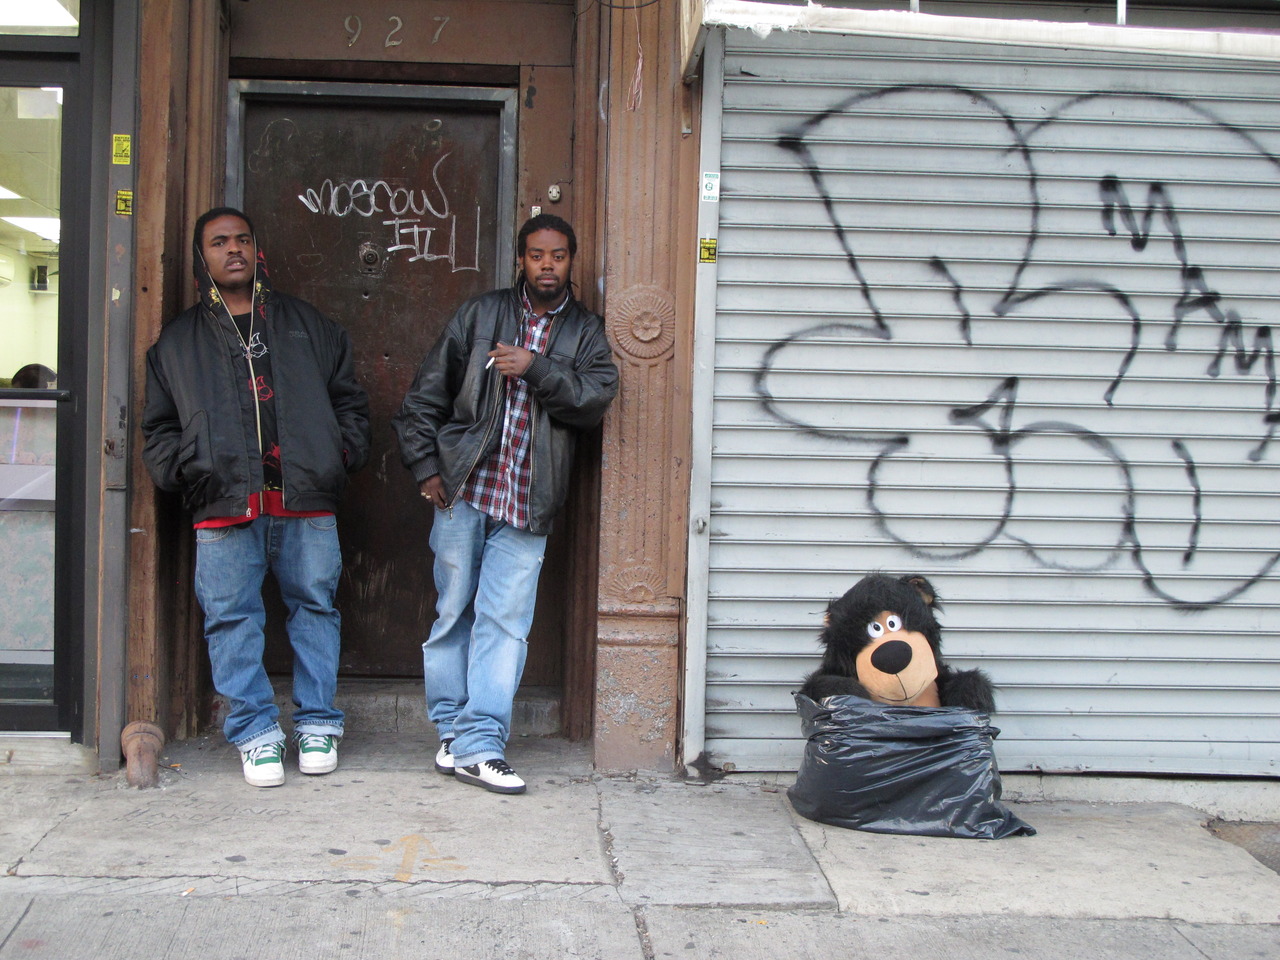 TOUGH GUYS WITH TEDDY BEAR (IN GARBAGE BAG) BEDSTUY